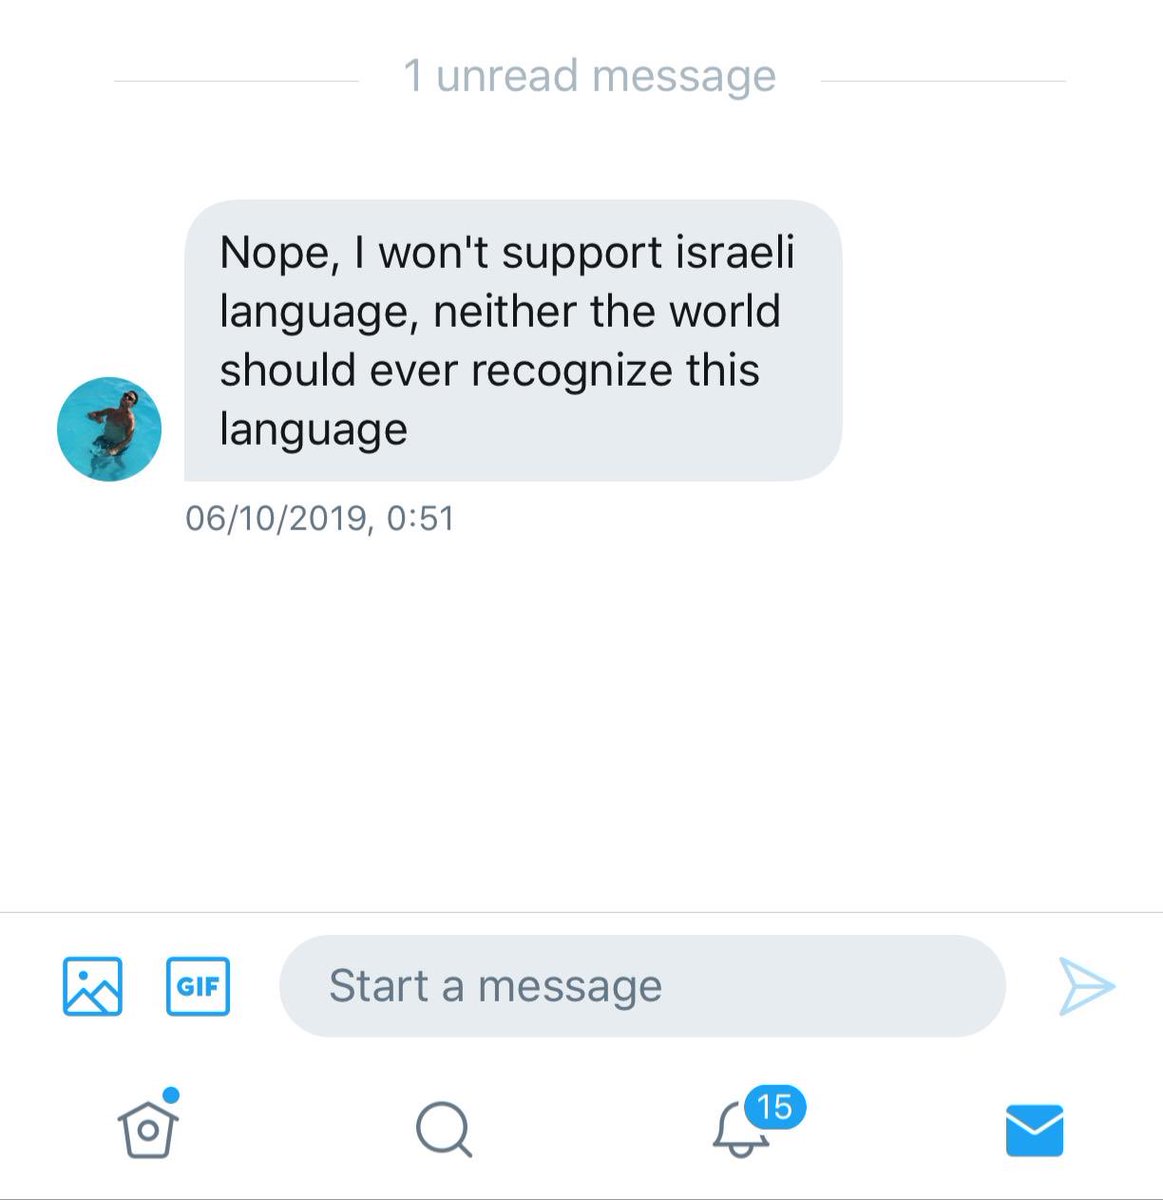 Someone offered phonecaller’s tweak dev to translate it to Hebrew and that’s how he responded... absolutely disgusting